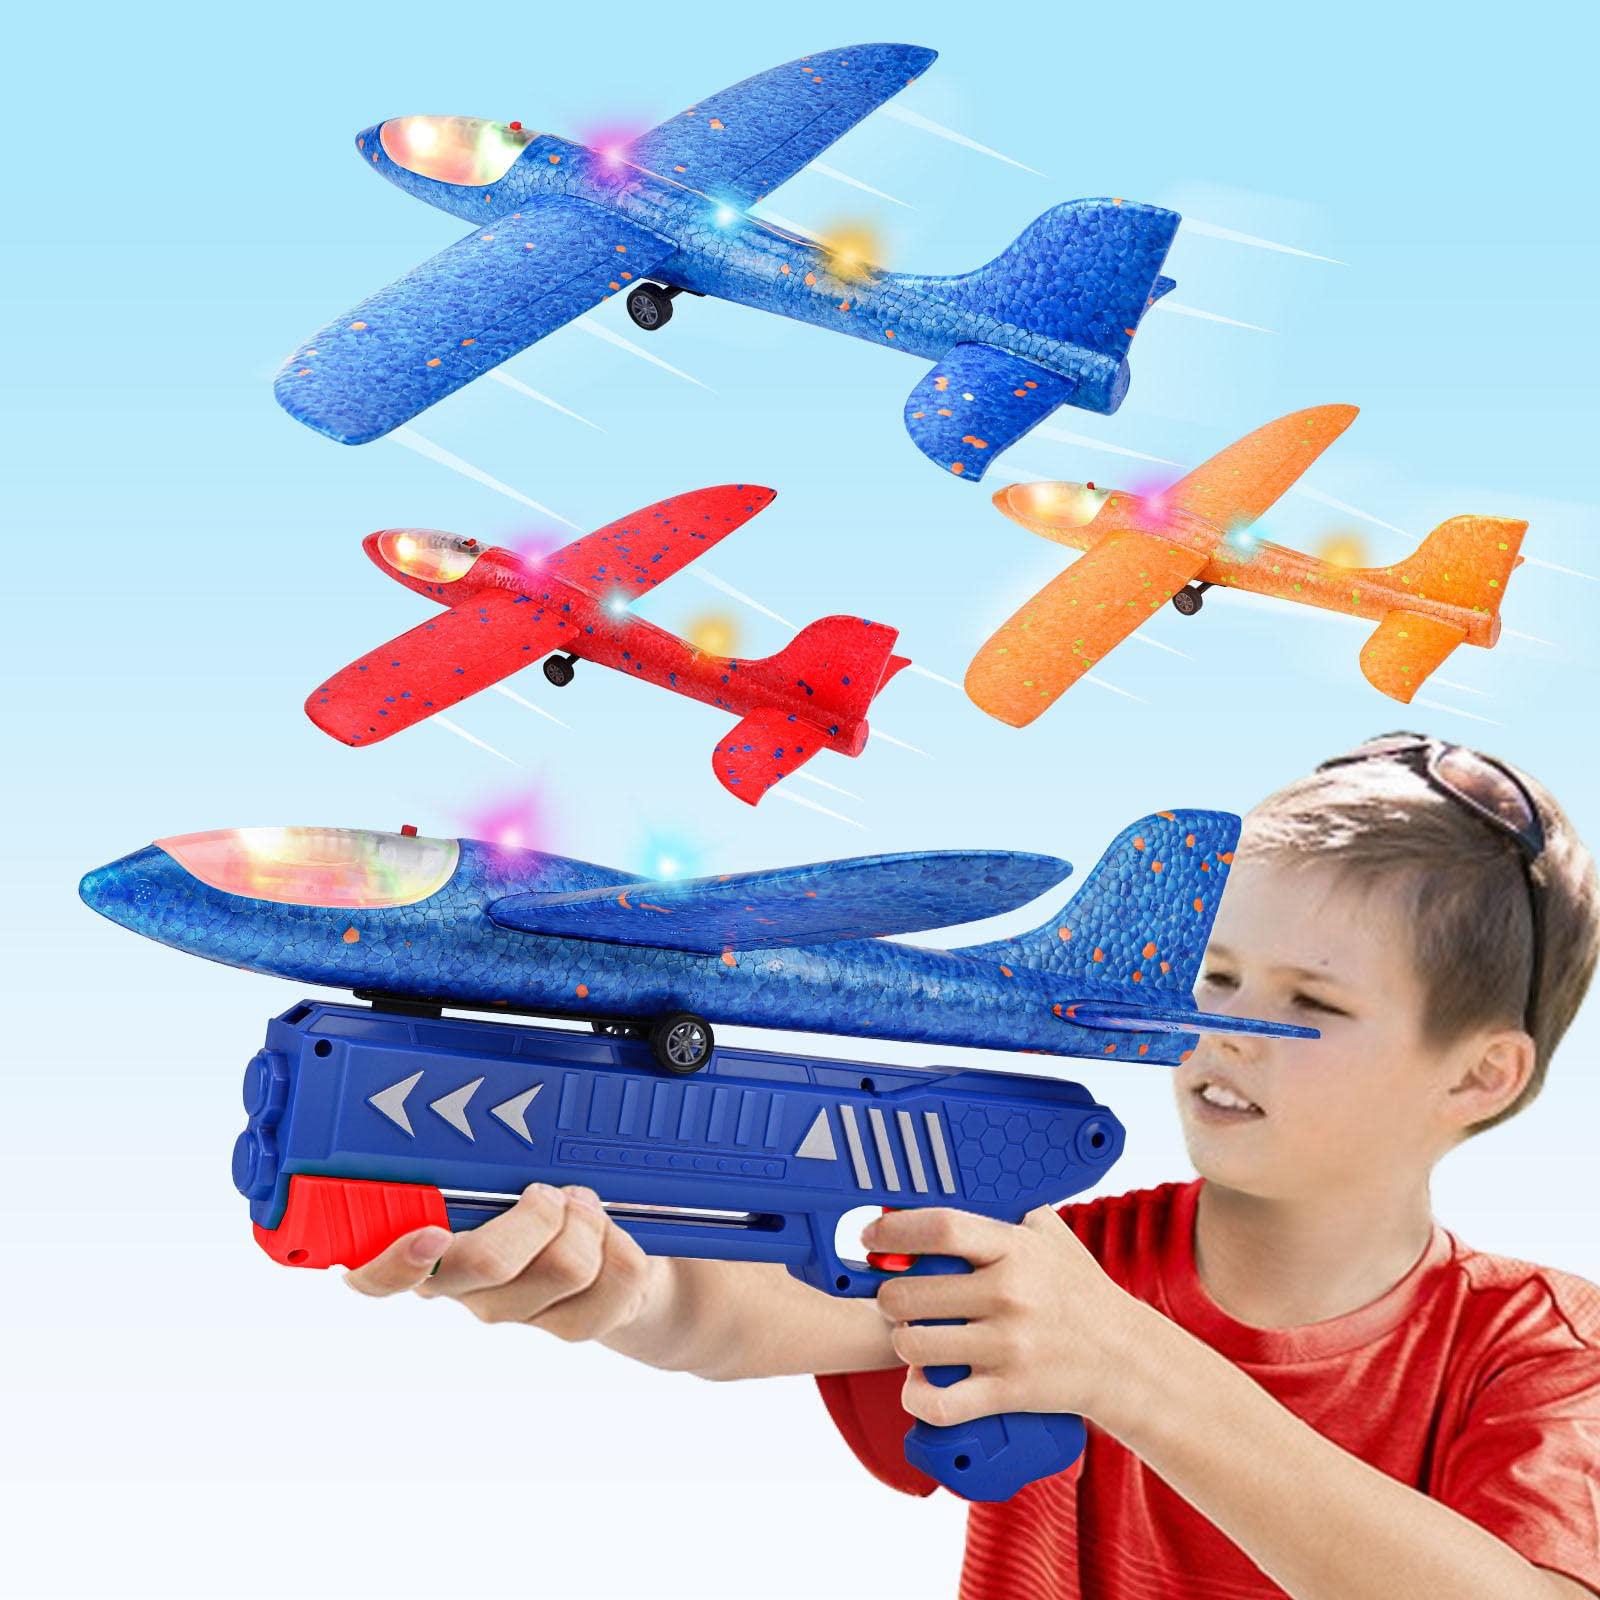 Aiencsai 3 pack airplane launcher toy, 12.6" foam glider led plane, 2 flight mode catapult plane for kids outdoor sport flying toys gi